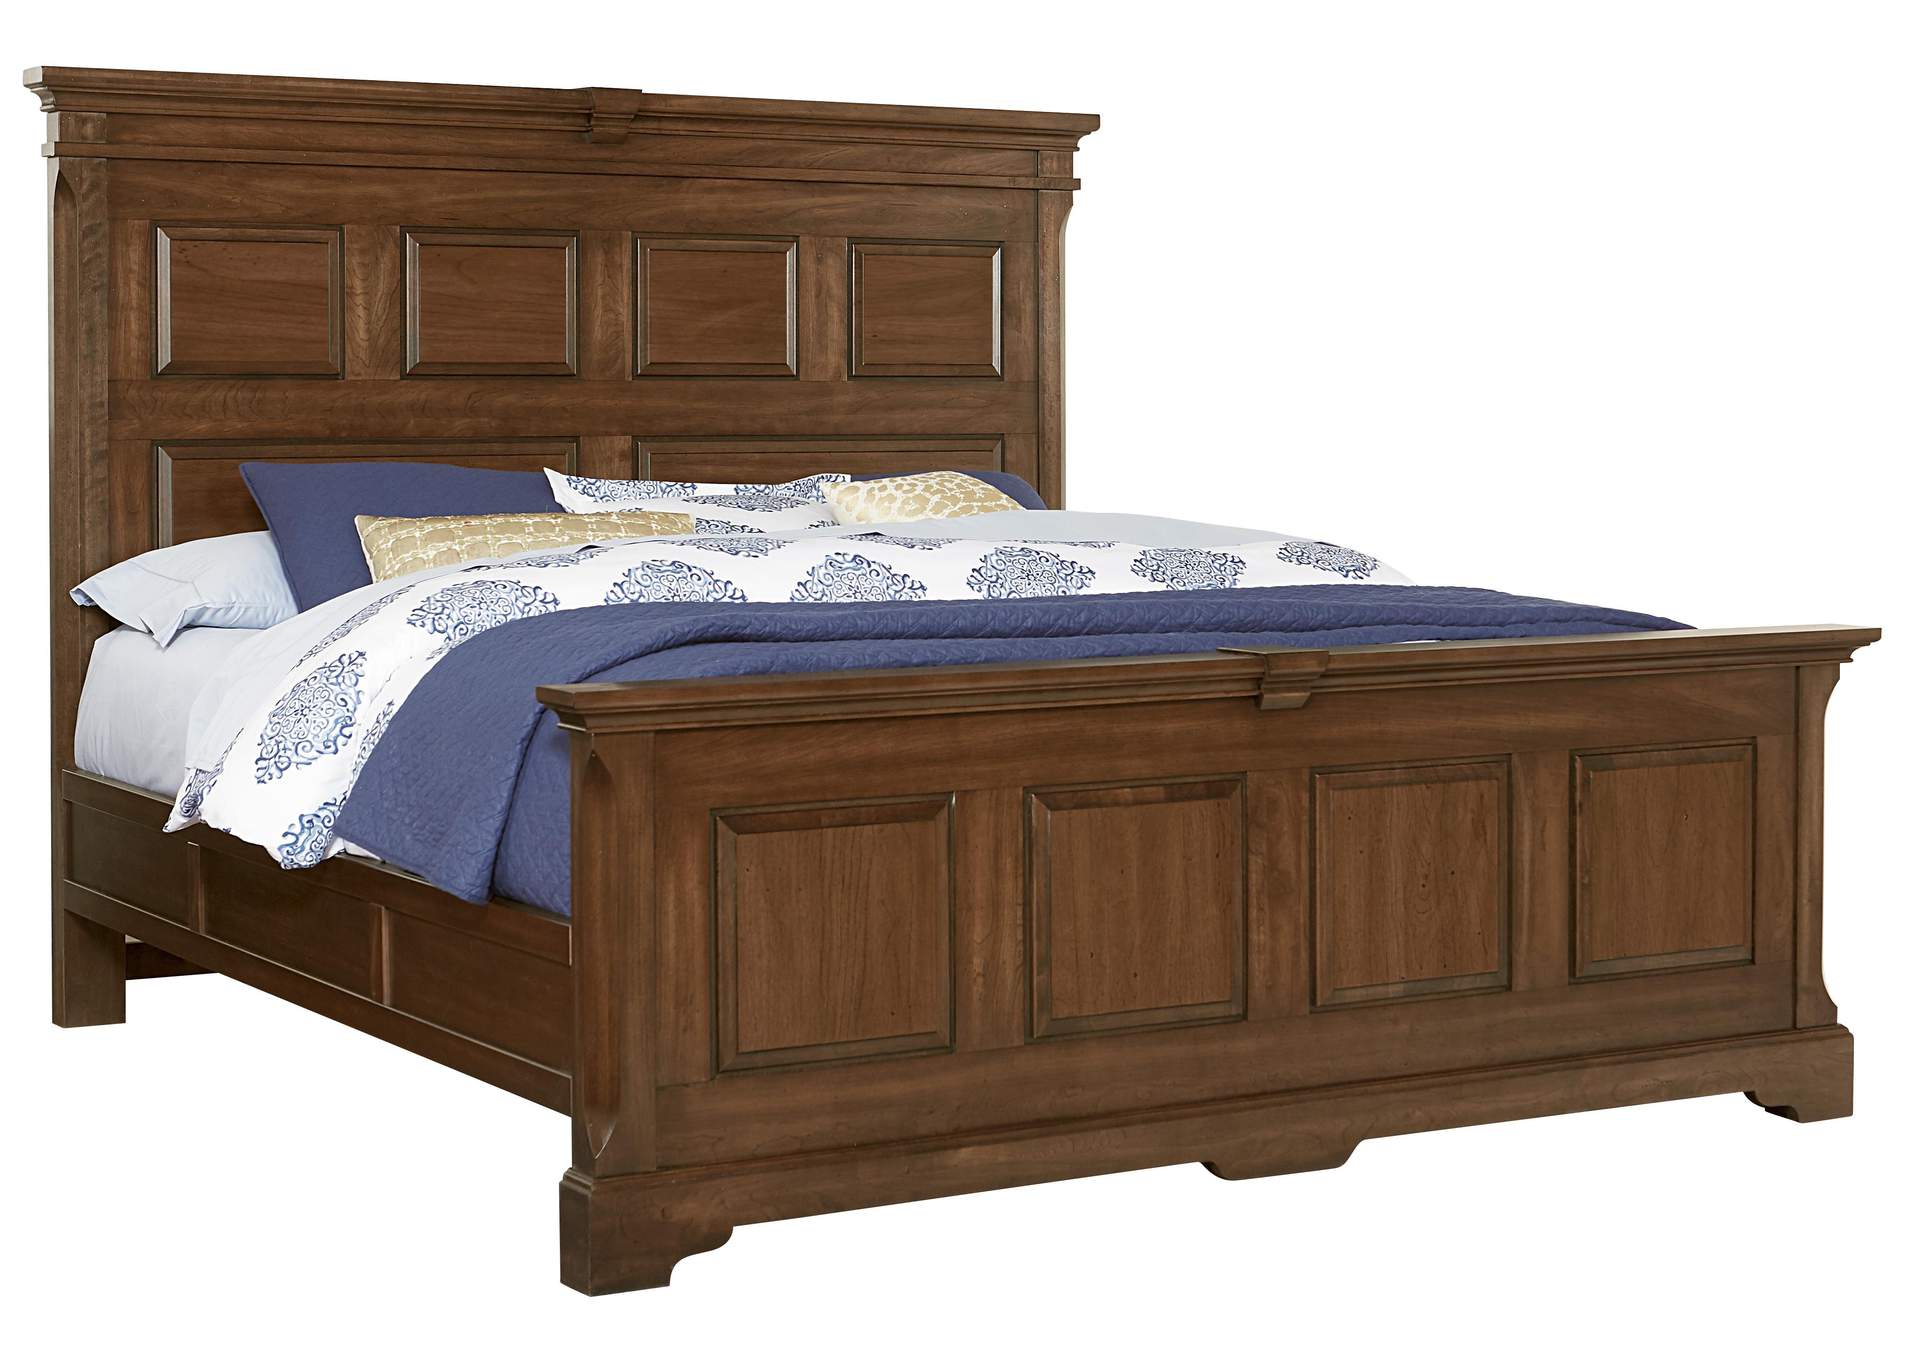 Queen Mansion Bed with Decorative Rails,Vaughan-Bassett